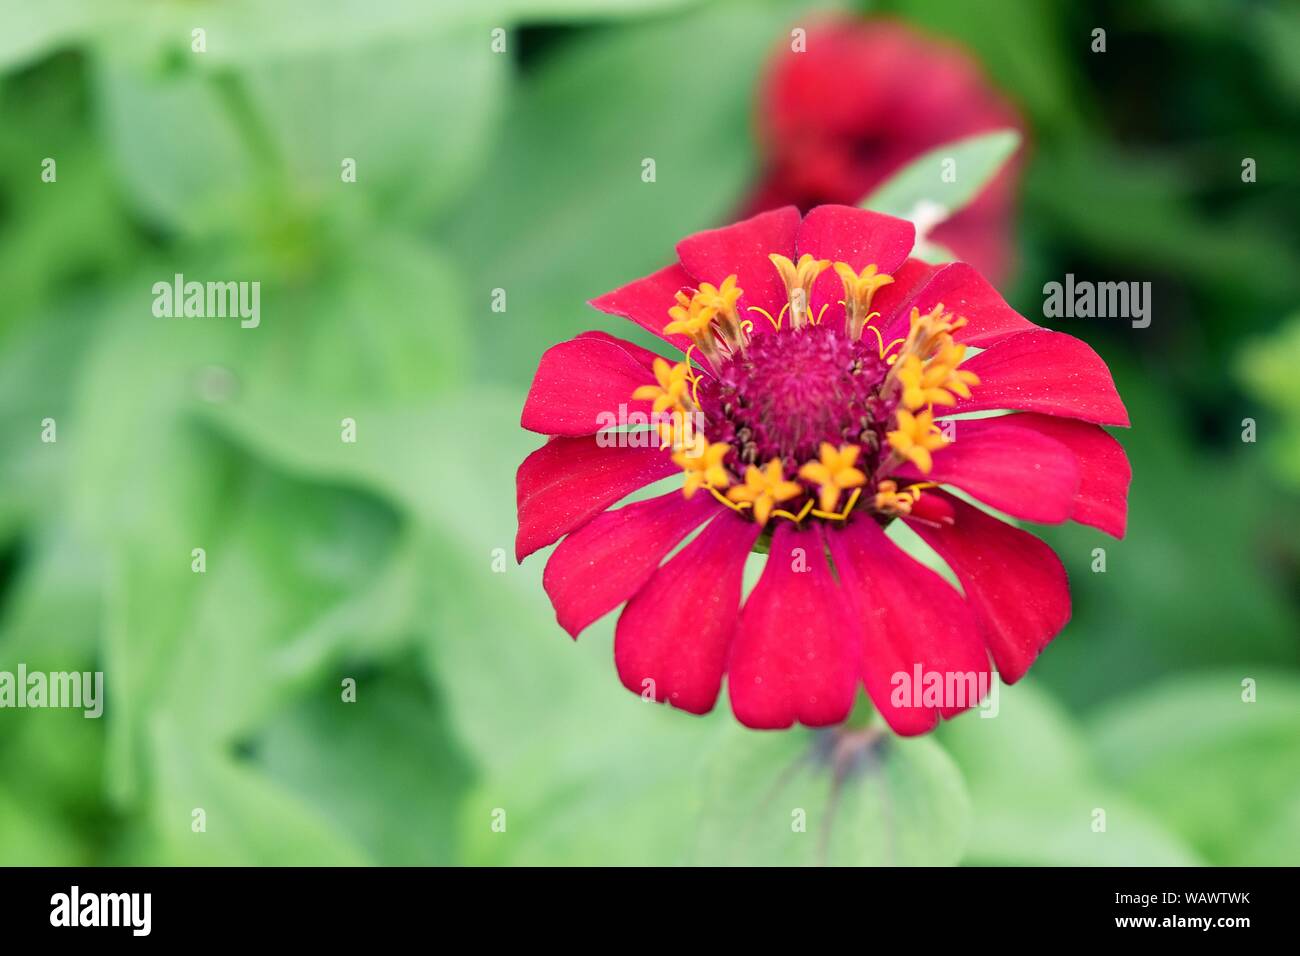 Red flower blossoming  reveals yellow pollen with  natural green leaves in the background,Zinnia , Zinnia violacea Cav Stock Photo